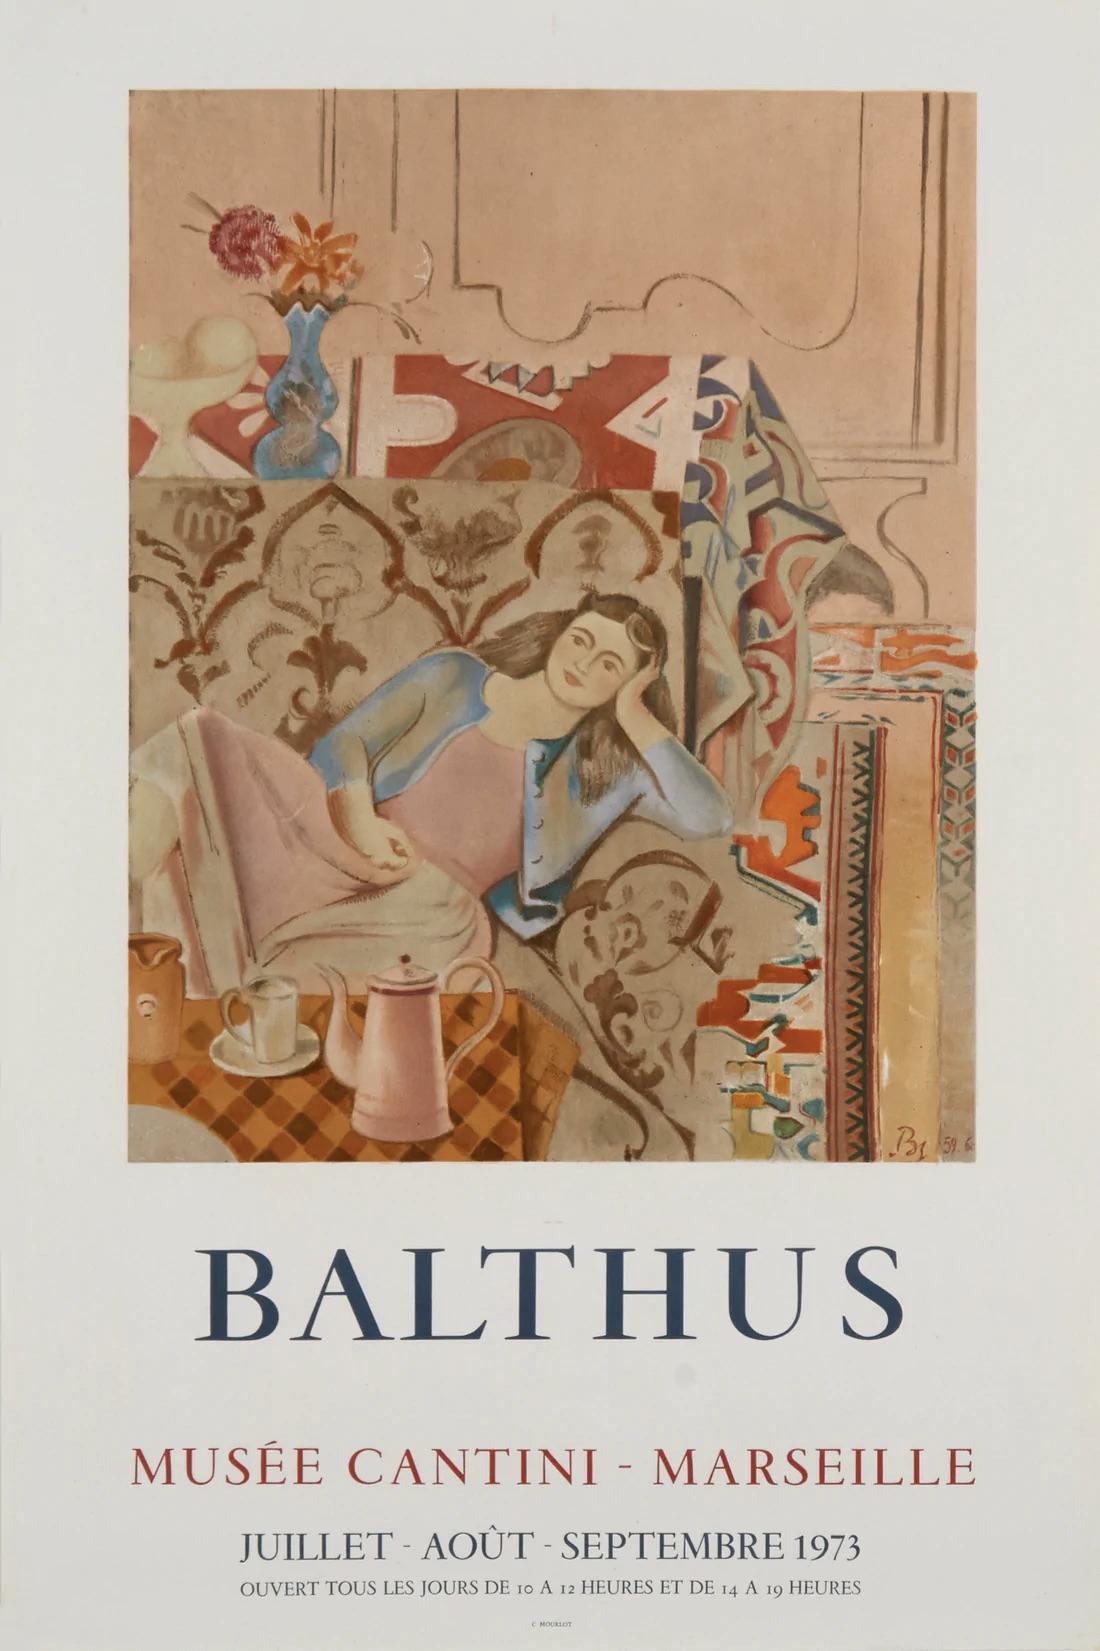 Artist: Balthasar Balthus

Medium: Color Lithographic Poster, 1973

Dimensions: 30.5 x 20.3 in, 77.5 x 51.6 cm

Classic Poster Paper - Condition A+

This lithographic poster was print at the Atelier Mourlot in Paris in 1973 to promote an exhibition